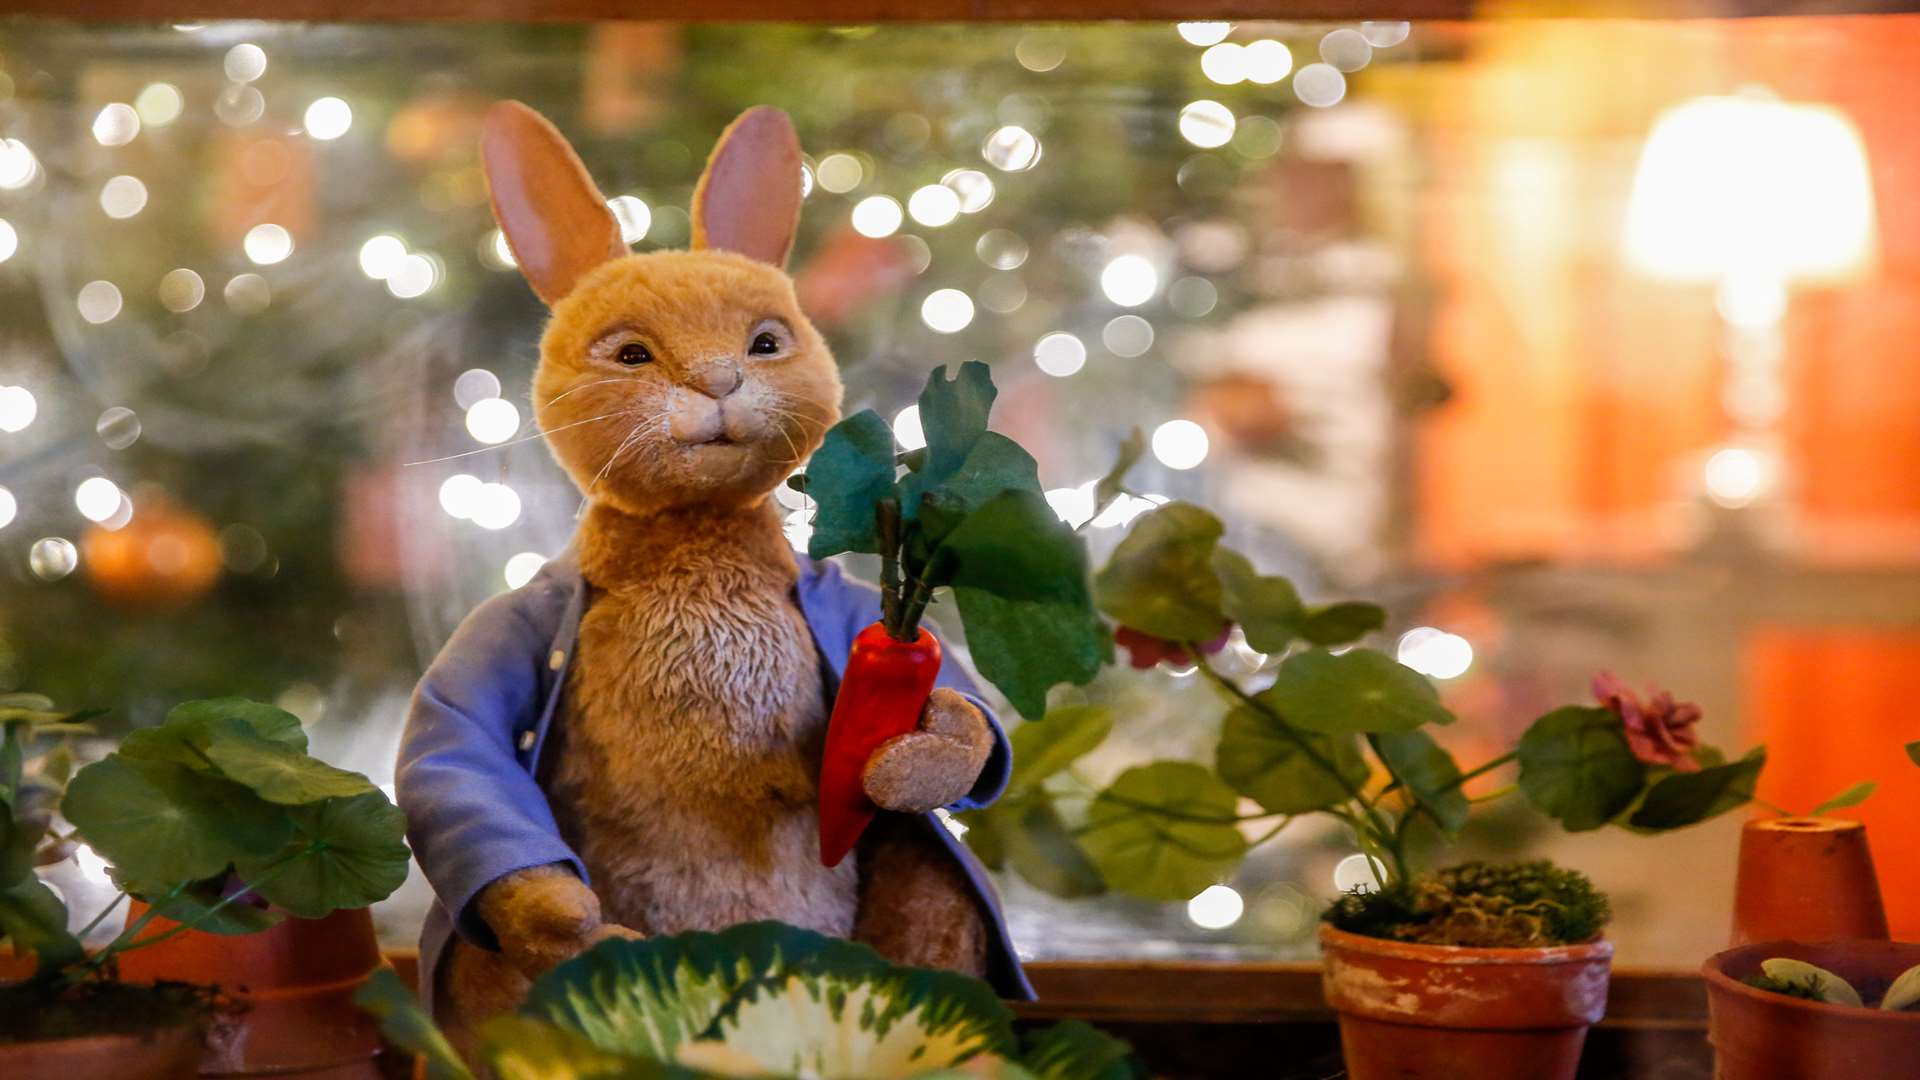 Peter Rabbit will be at Leeds Castle near Maidstone